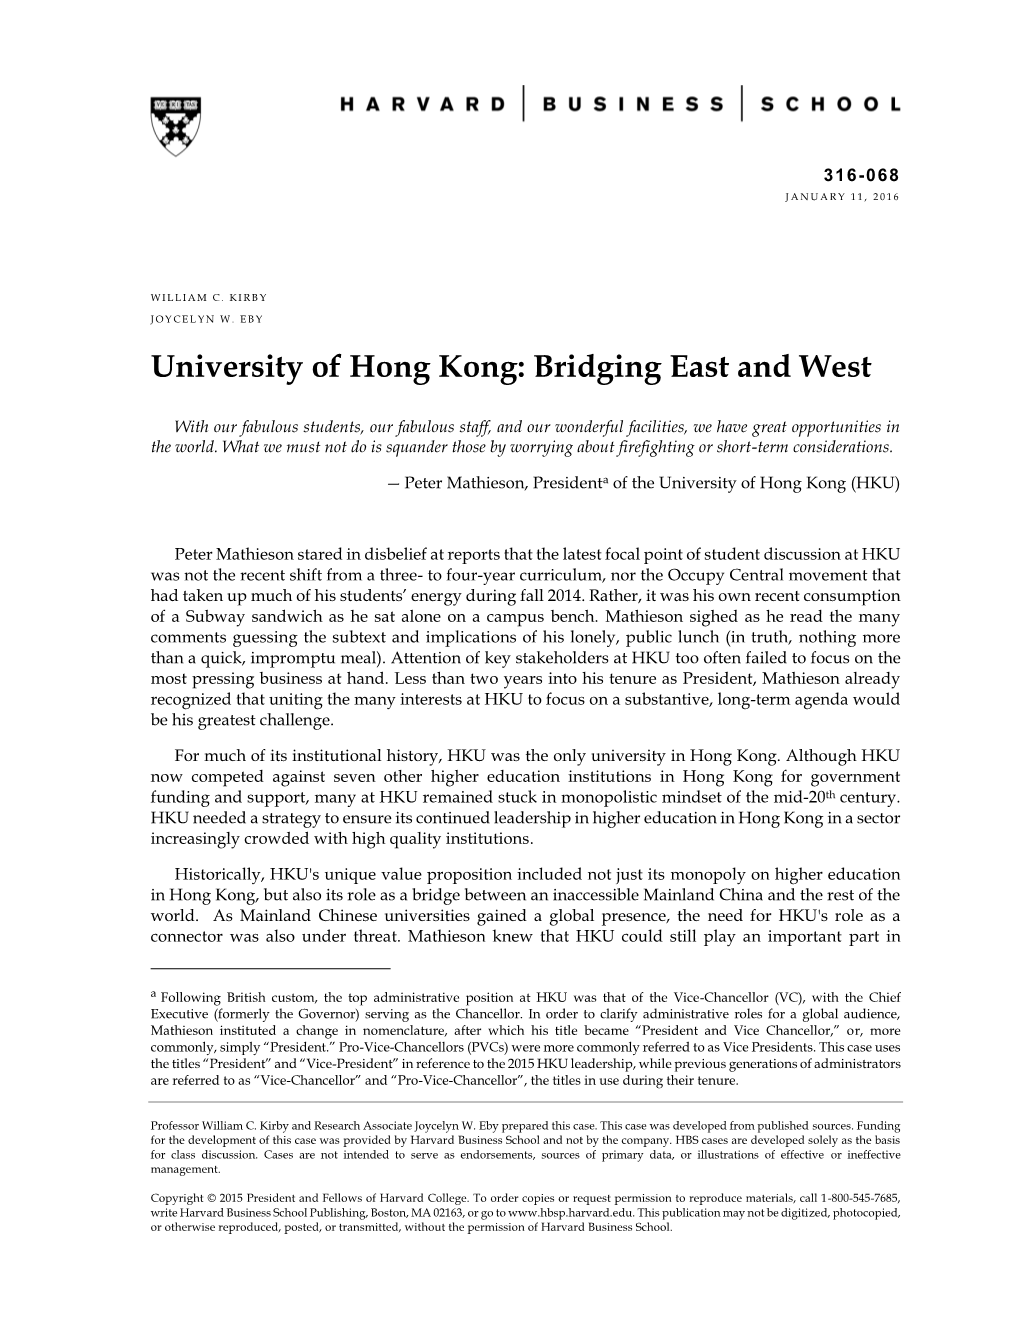 University of Hong Kong: Bridging East and West